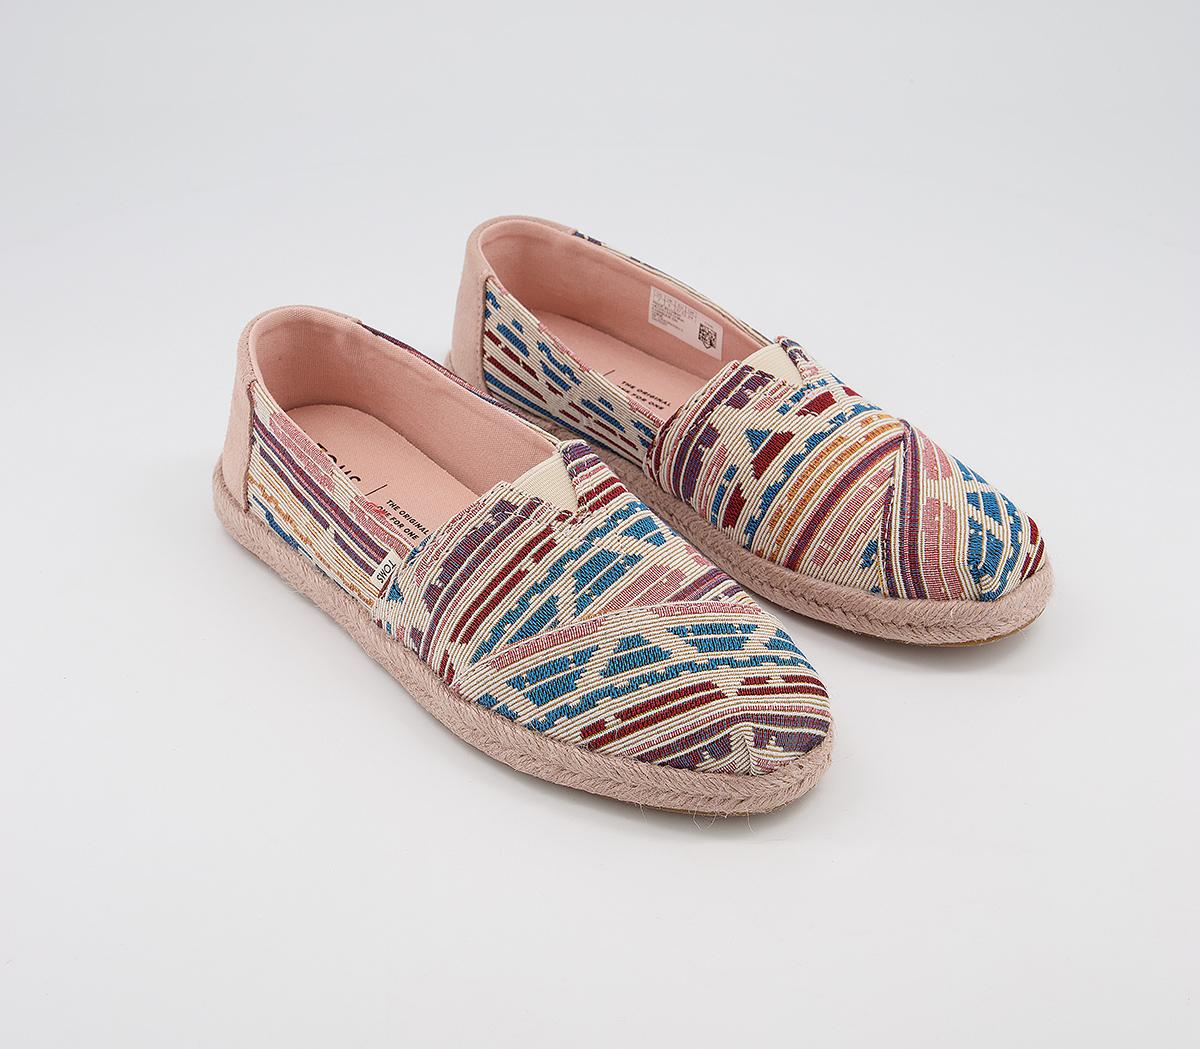 TOMS Alpargata Rope Slip Ons Natural Metallic Woven - Flat Shoes for Women